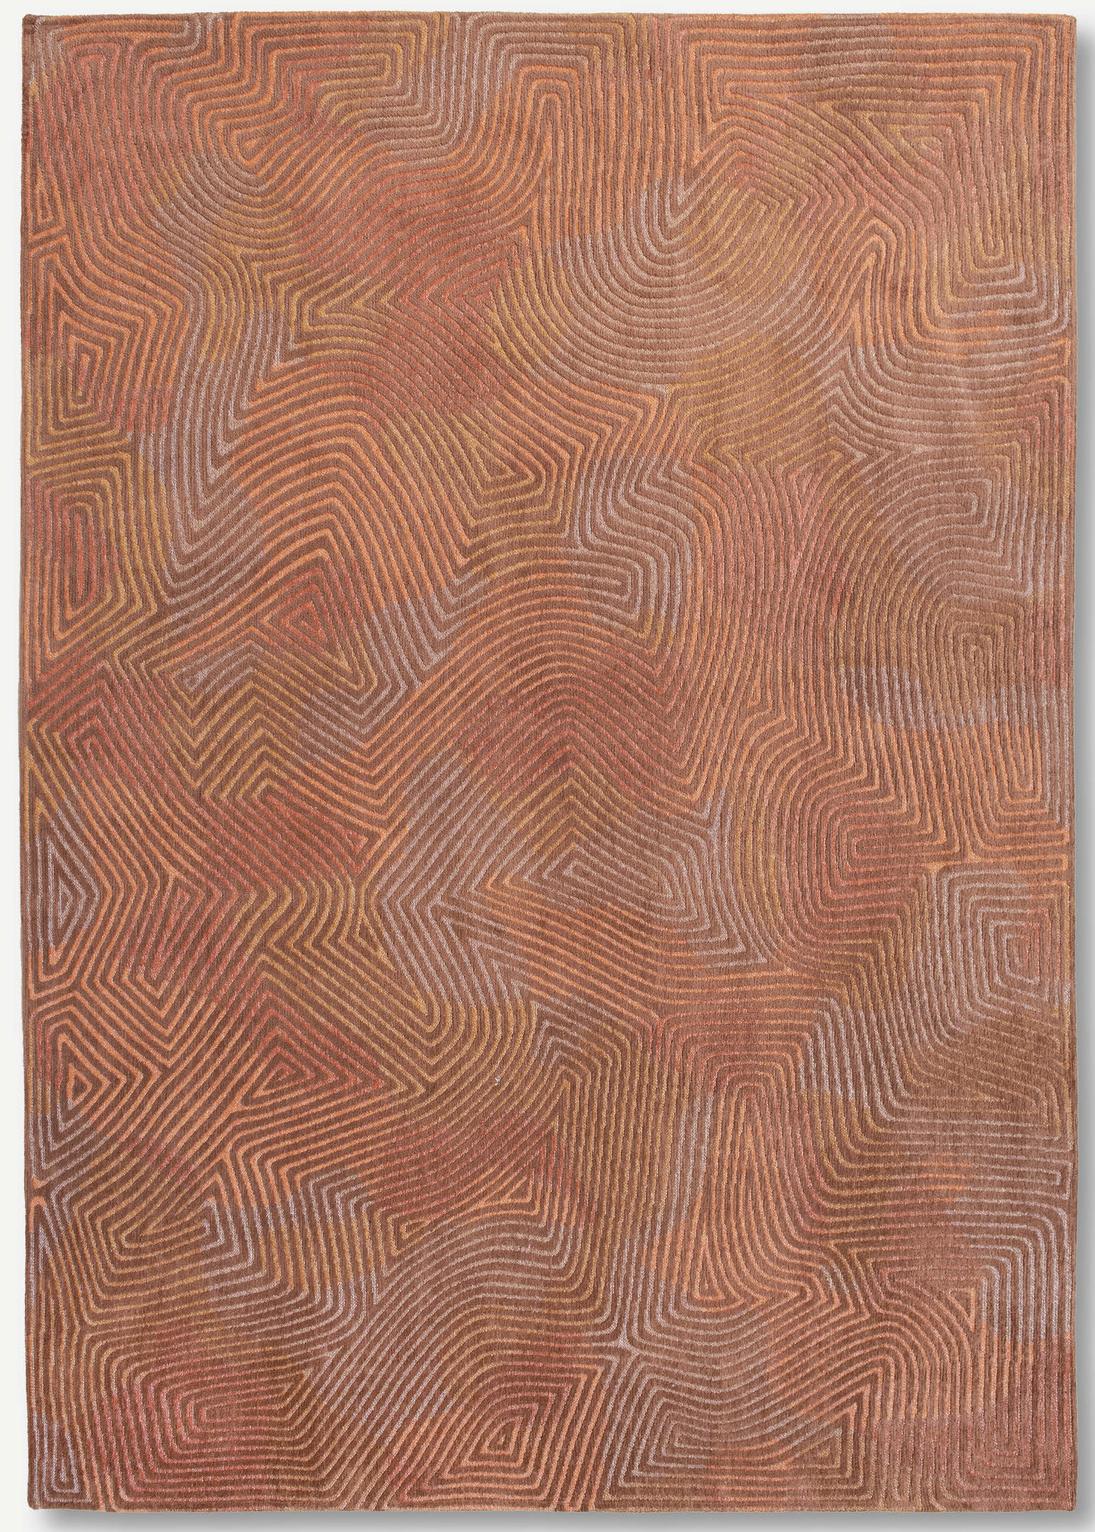 Brown Waves Flatwoven Rug ☞ Size: 9' 2" x 13' (280 x 390 cm)